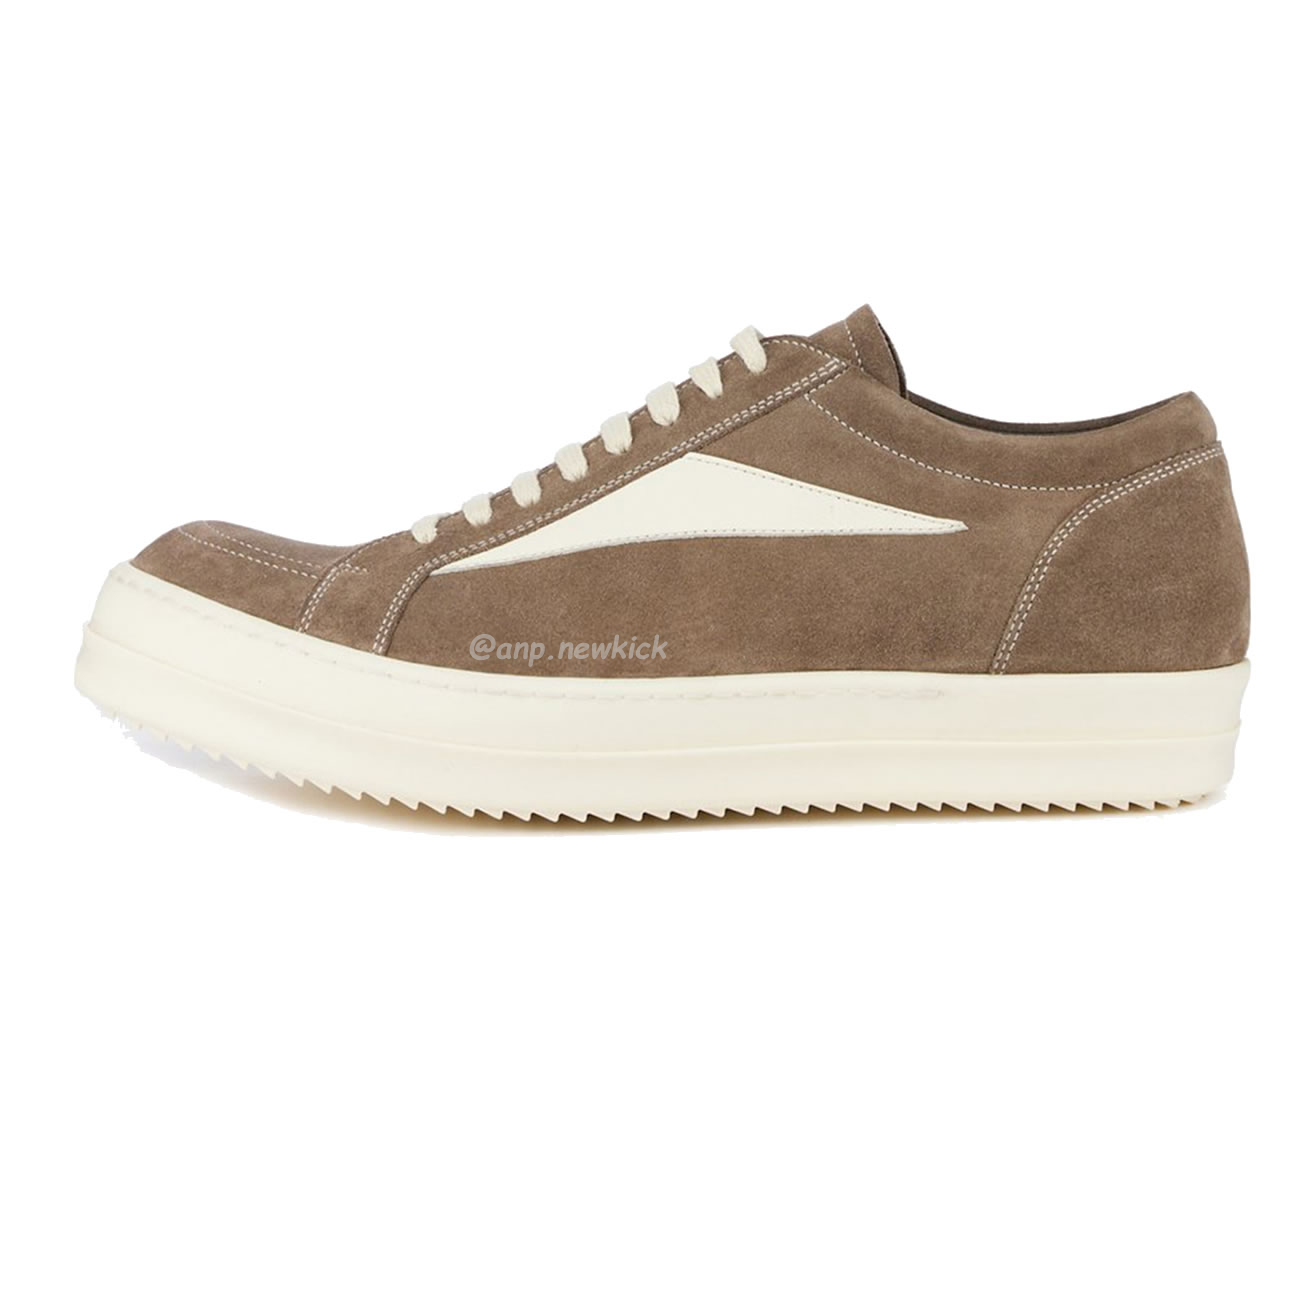 Rick Owens Leather Low Top Vintage Sneakers Suede Canvas Black Taupe Grey Faded Pnk Pearl Milk Dark Dust (40) - newkick.org